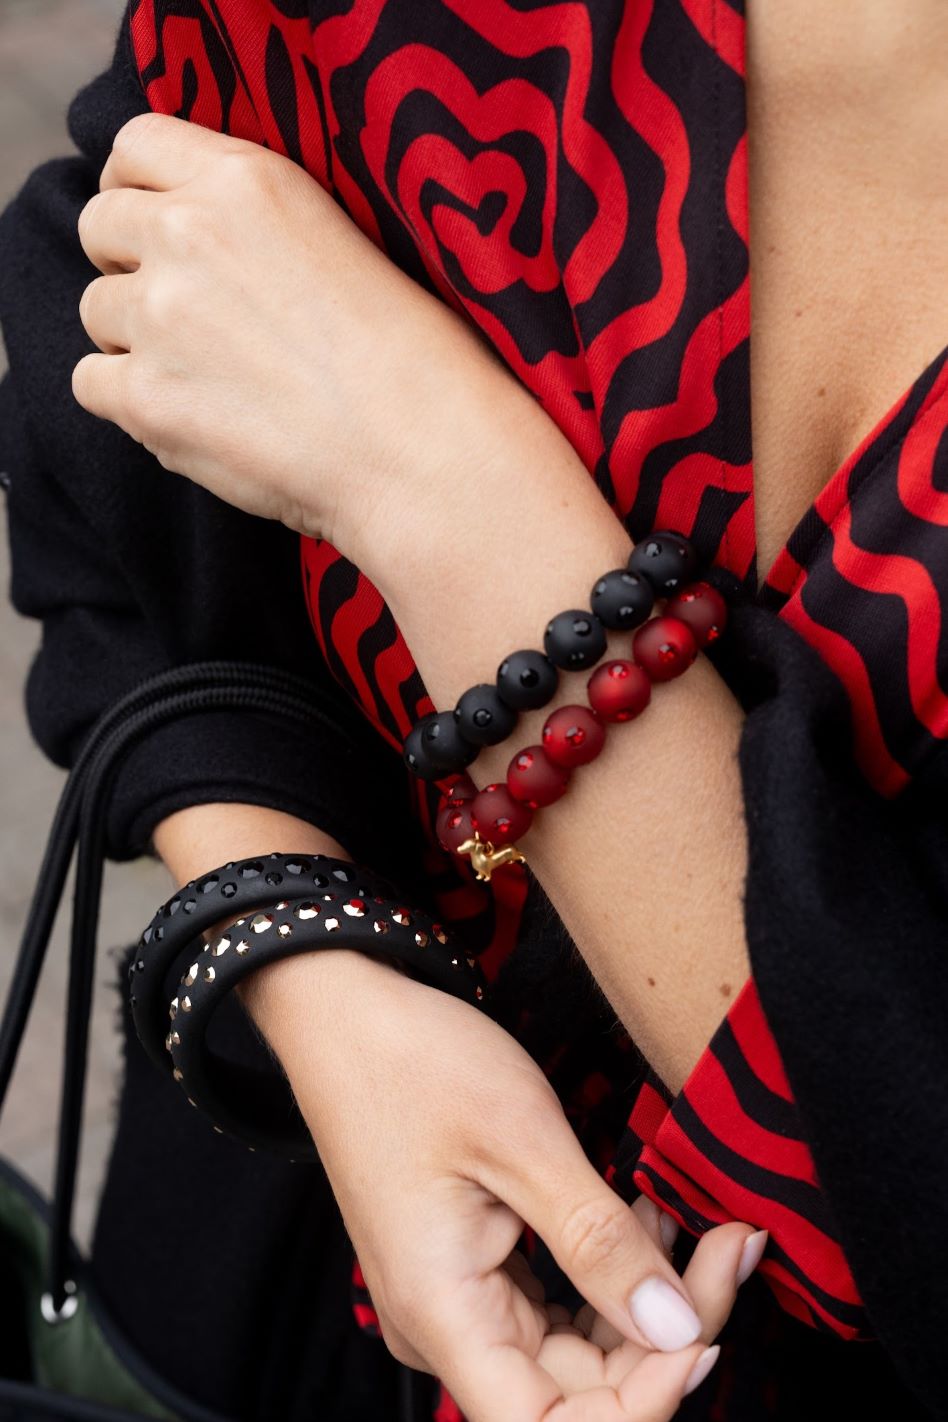 Frau mit Coloristers Armreifen und Perlenarmband in dunklem rot mit Kristallen. Women with Coloristers bangles and pearl bracelets in dark red with crystals. 